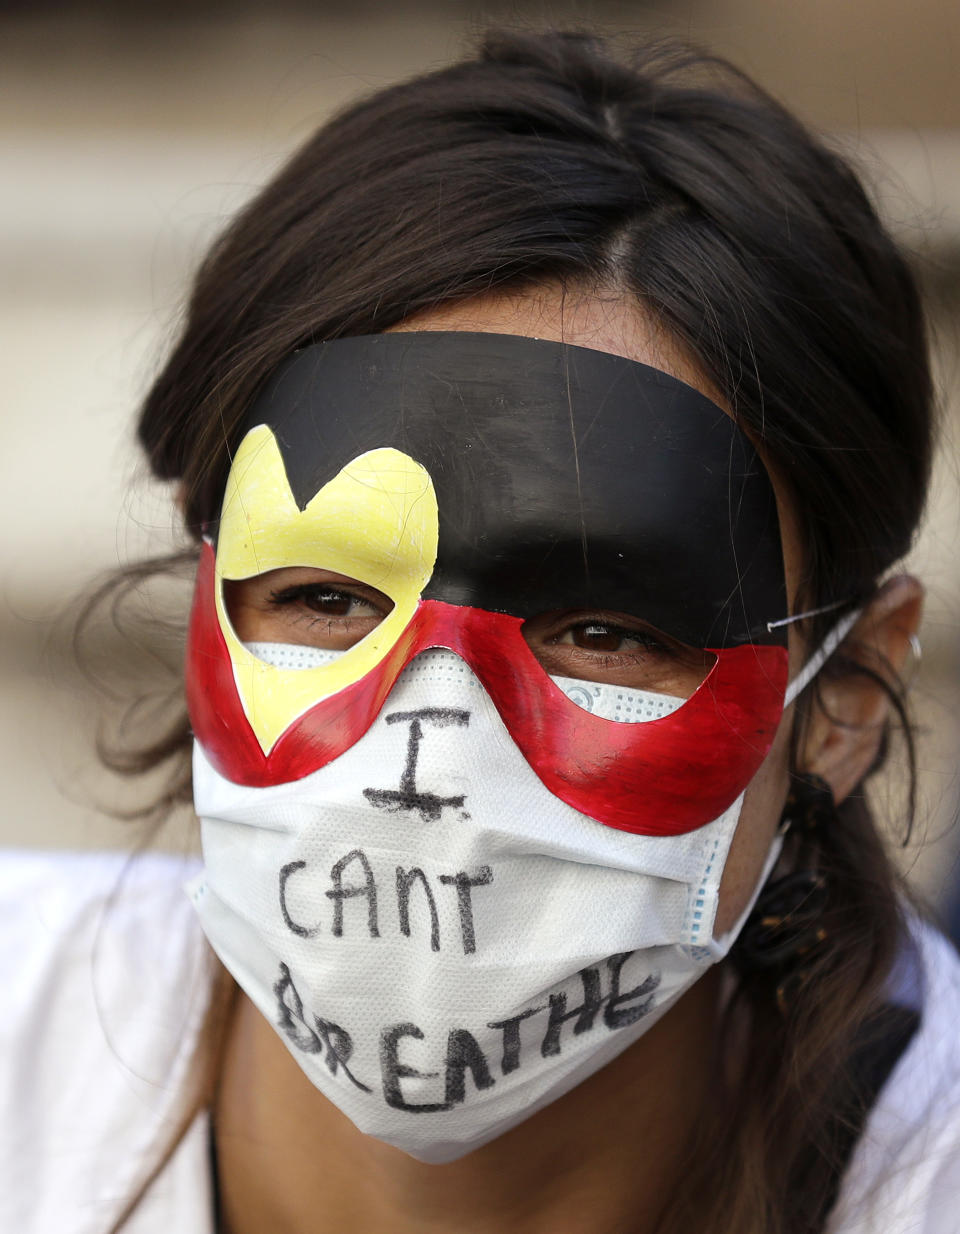 A protester wears a mask as thousands gather at Town Hall in Sydney, Saturday, June 6, 2020, to support the cause of U.S. protests over the death of George Floyd. Black Lives Matter protests across Australia proceeded mostly peacefully as thousands of demonstrators in state capitals honored the memory of Floyd and protested the deaths of indigenous Australians in custody. (AP Photo/Rick Rycroft)